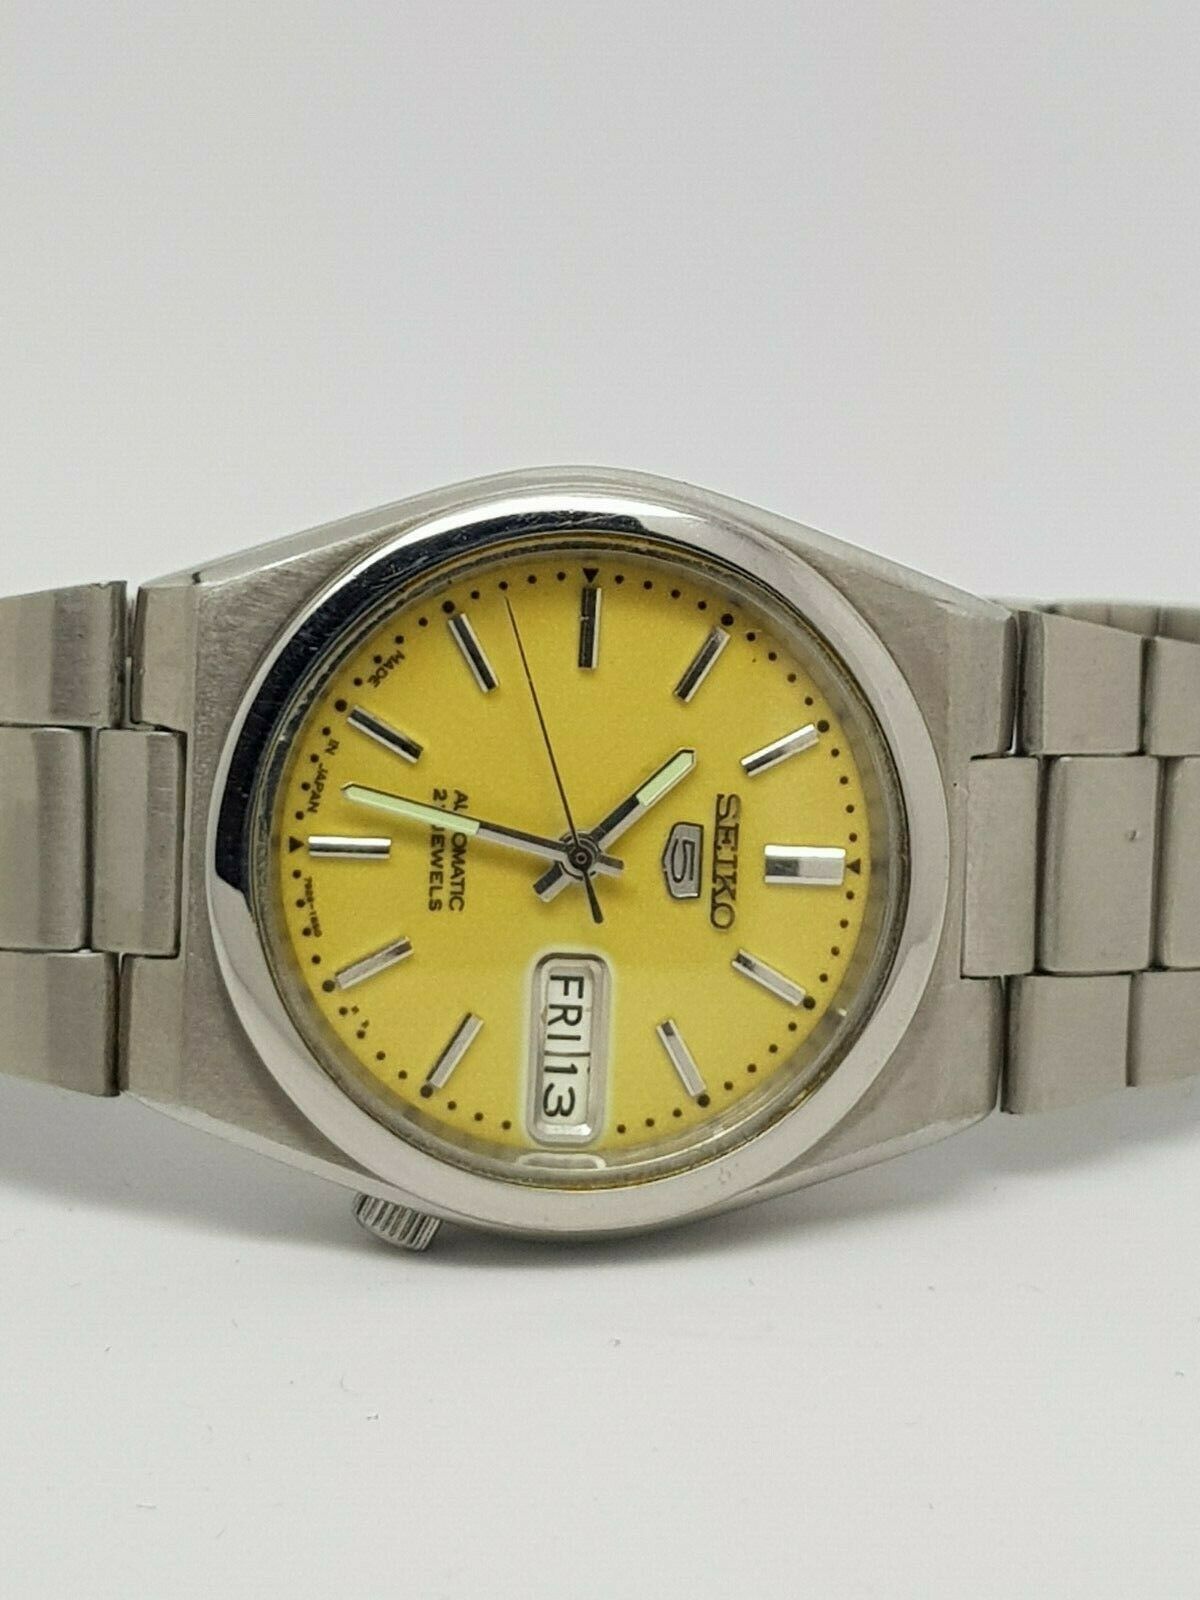 VINTAGE SEIKO 7S26-0530 AUTOMATIC DAY/DATE 21 JEWELS JAPAN MADE MEN'S WATCH  | WatchCharts